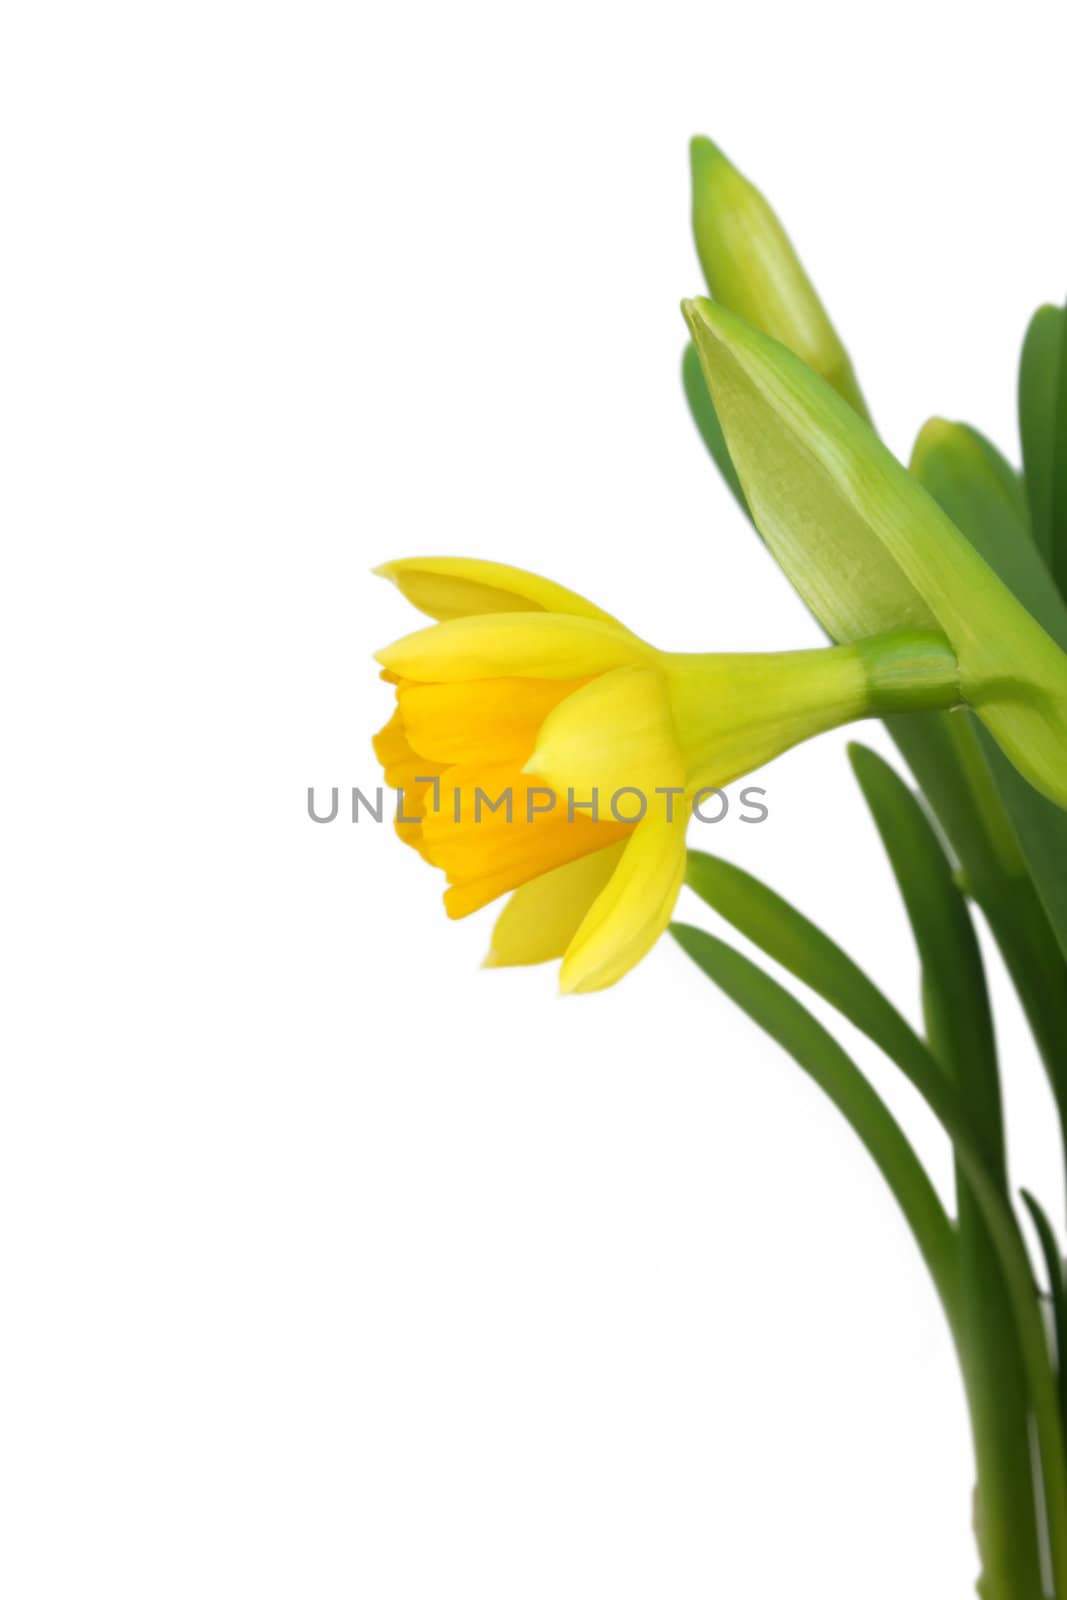 a profile view of a daffodil isolated on a white background.